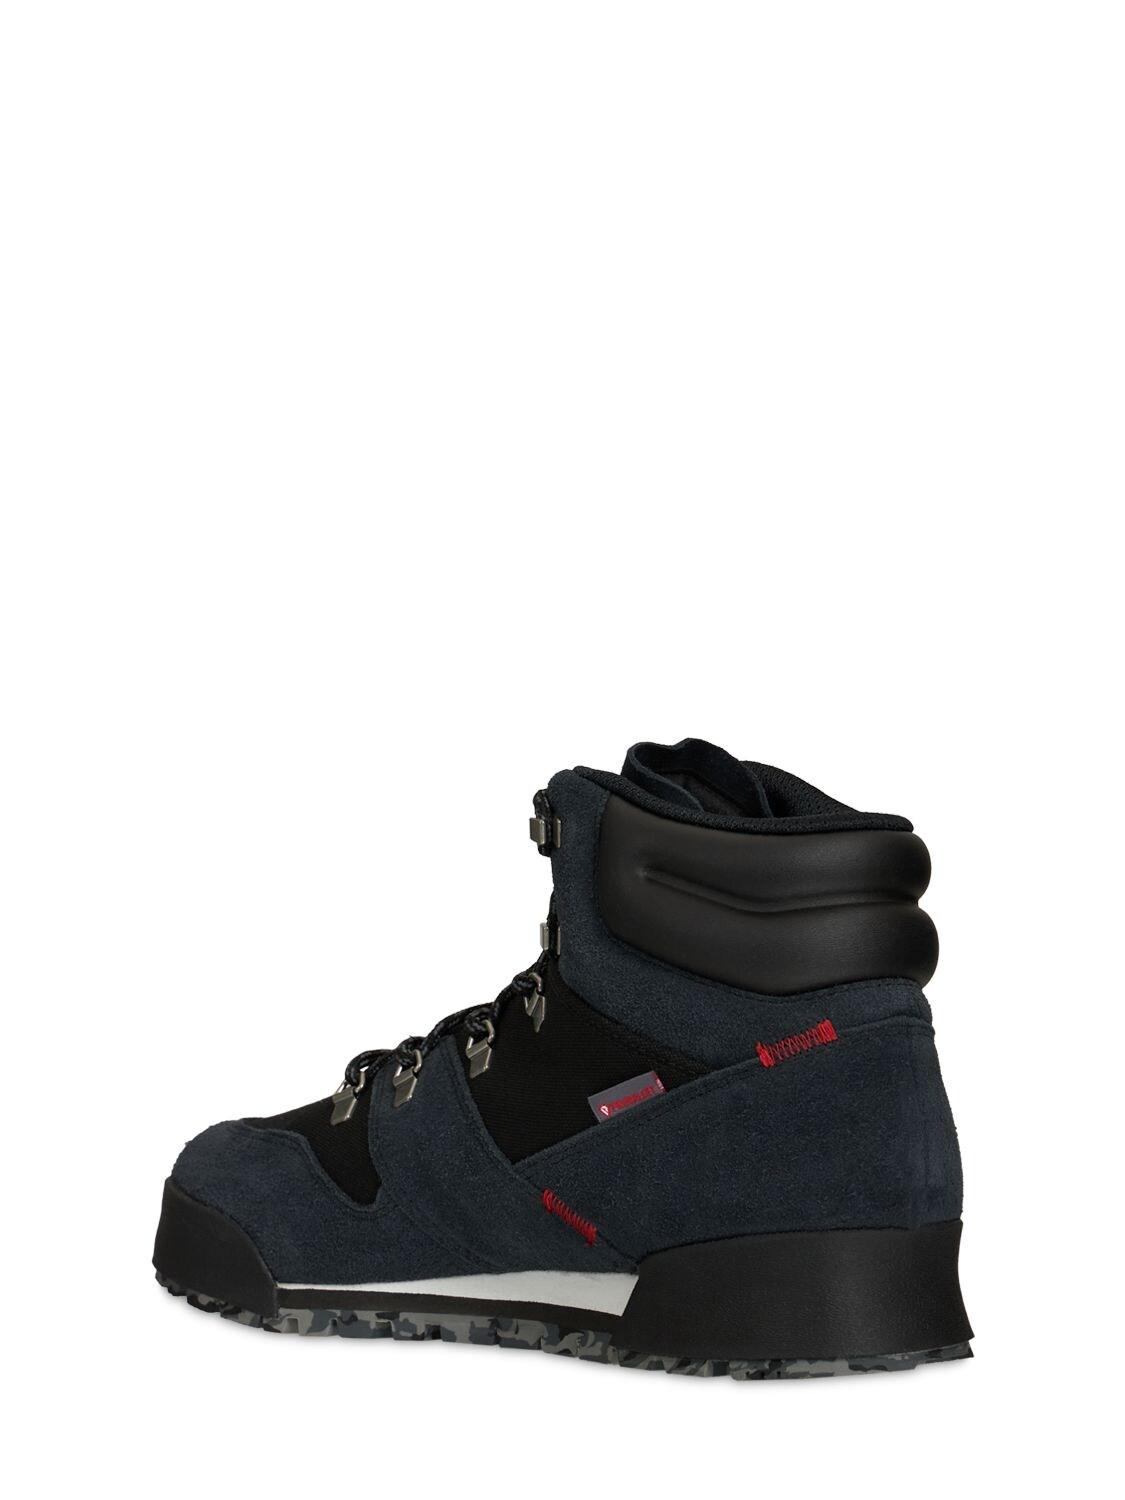 adidas Originals Leather Terrex Snowpitch Cold.rdy Boots in Black for Men -  Lyst